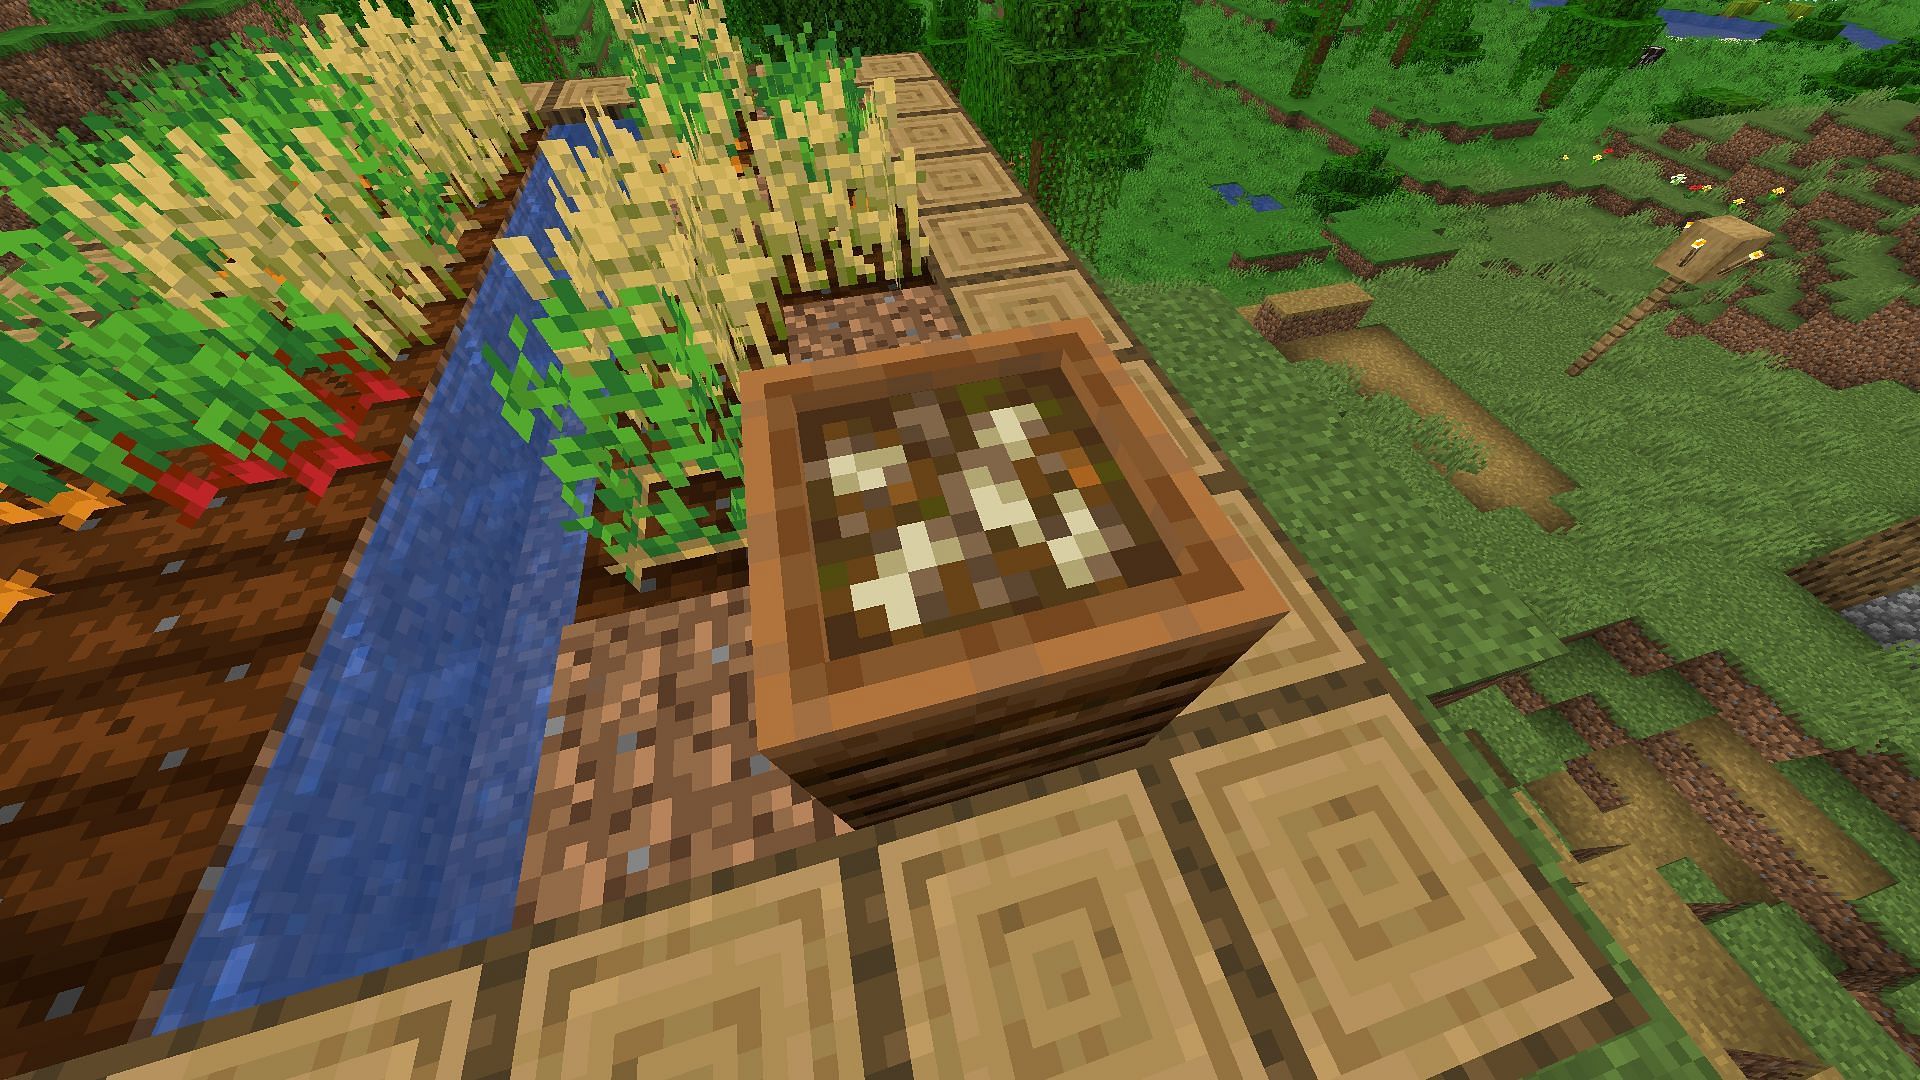 Bone meal ready for collection from a full composter (Image via Minecraft 1.19 update)